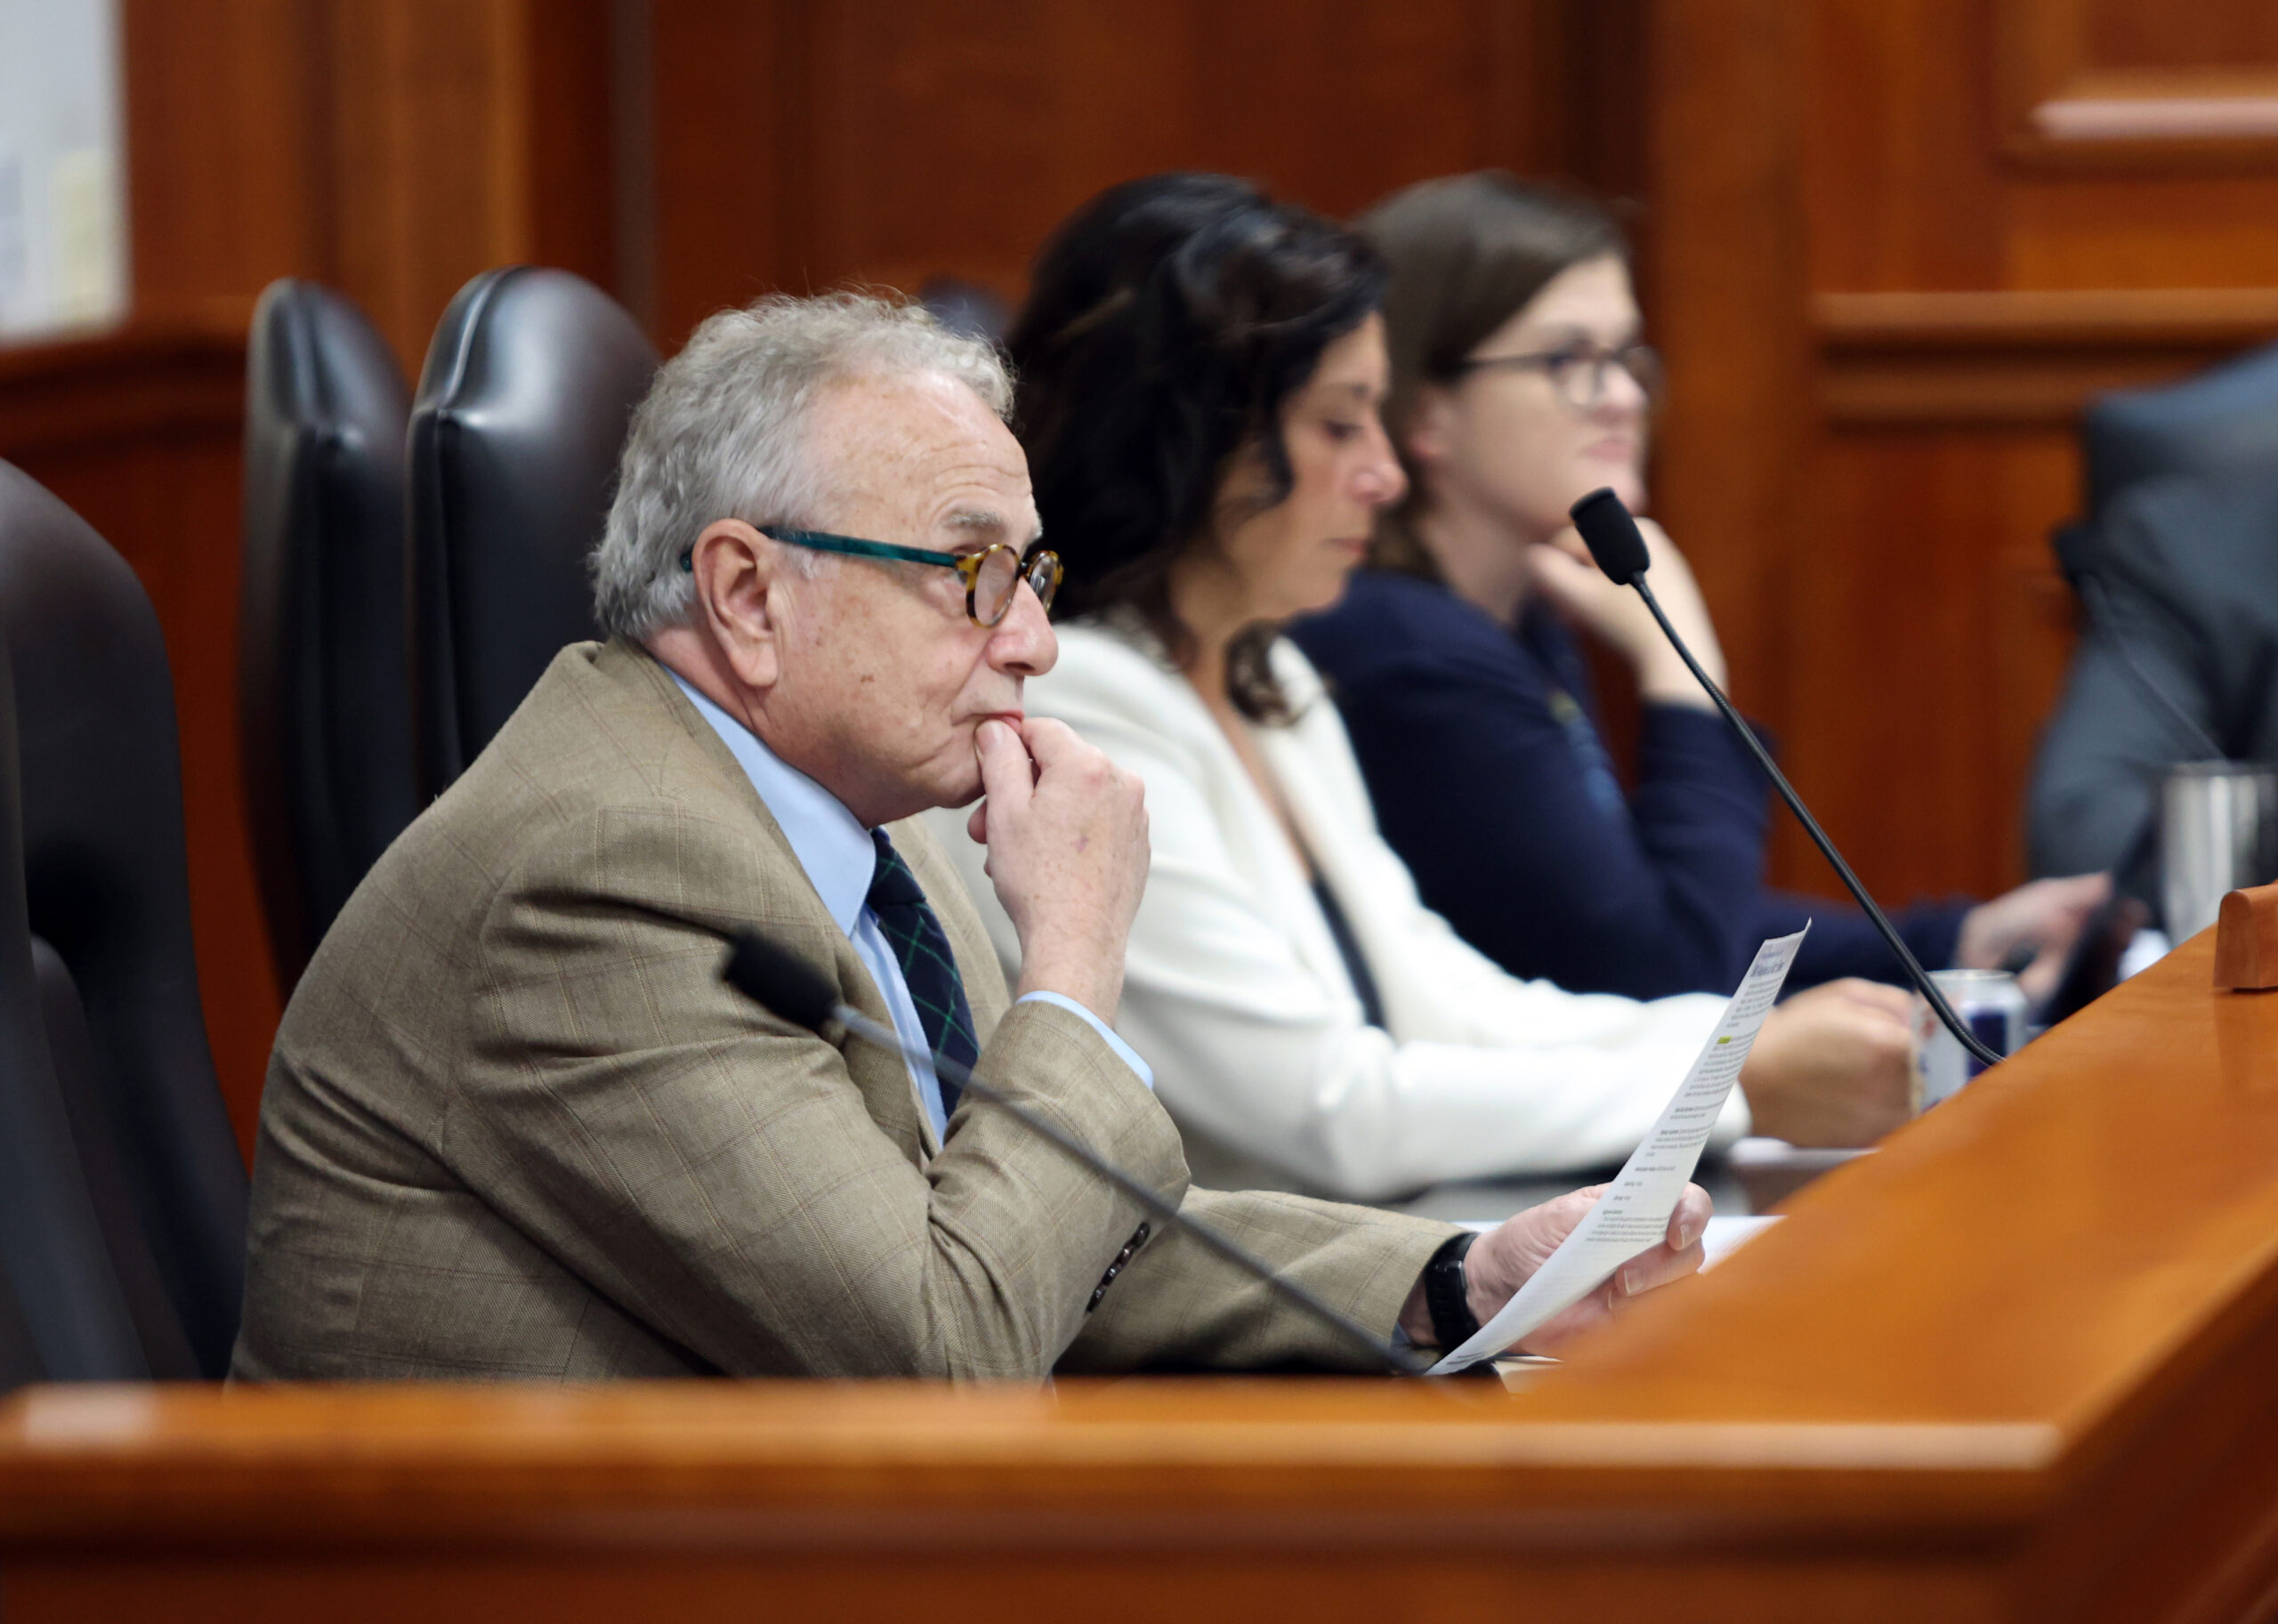 State Rep. Jeffrey Pepper (D-Dearborn) in the House Agriculture Committee on Wednesday, May 18, 2022.